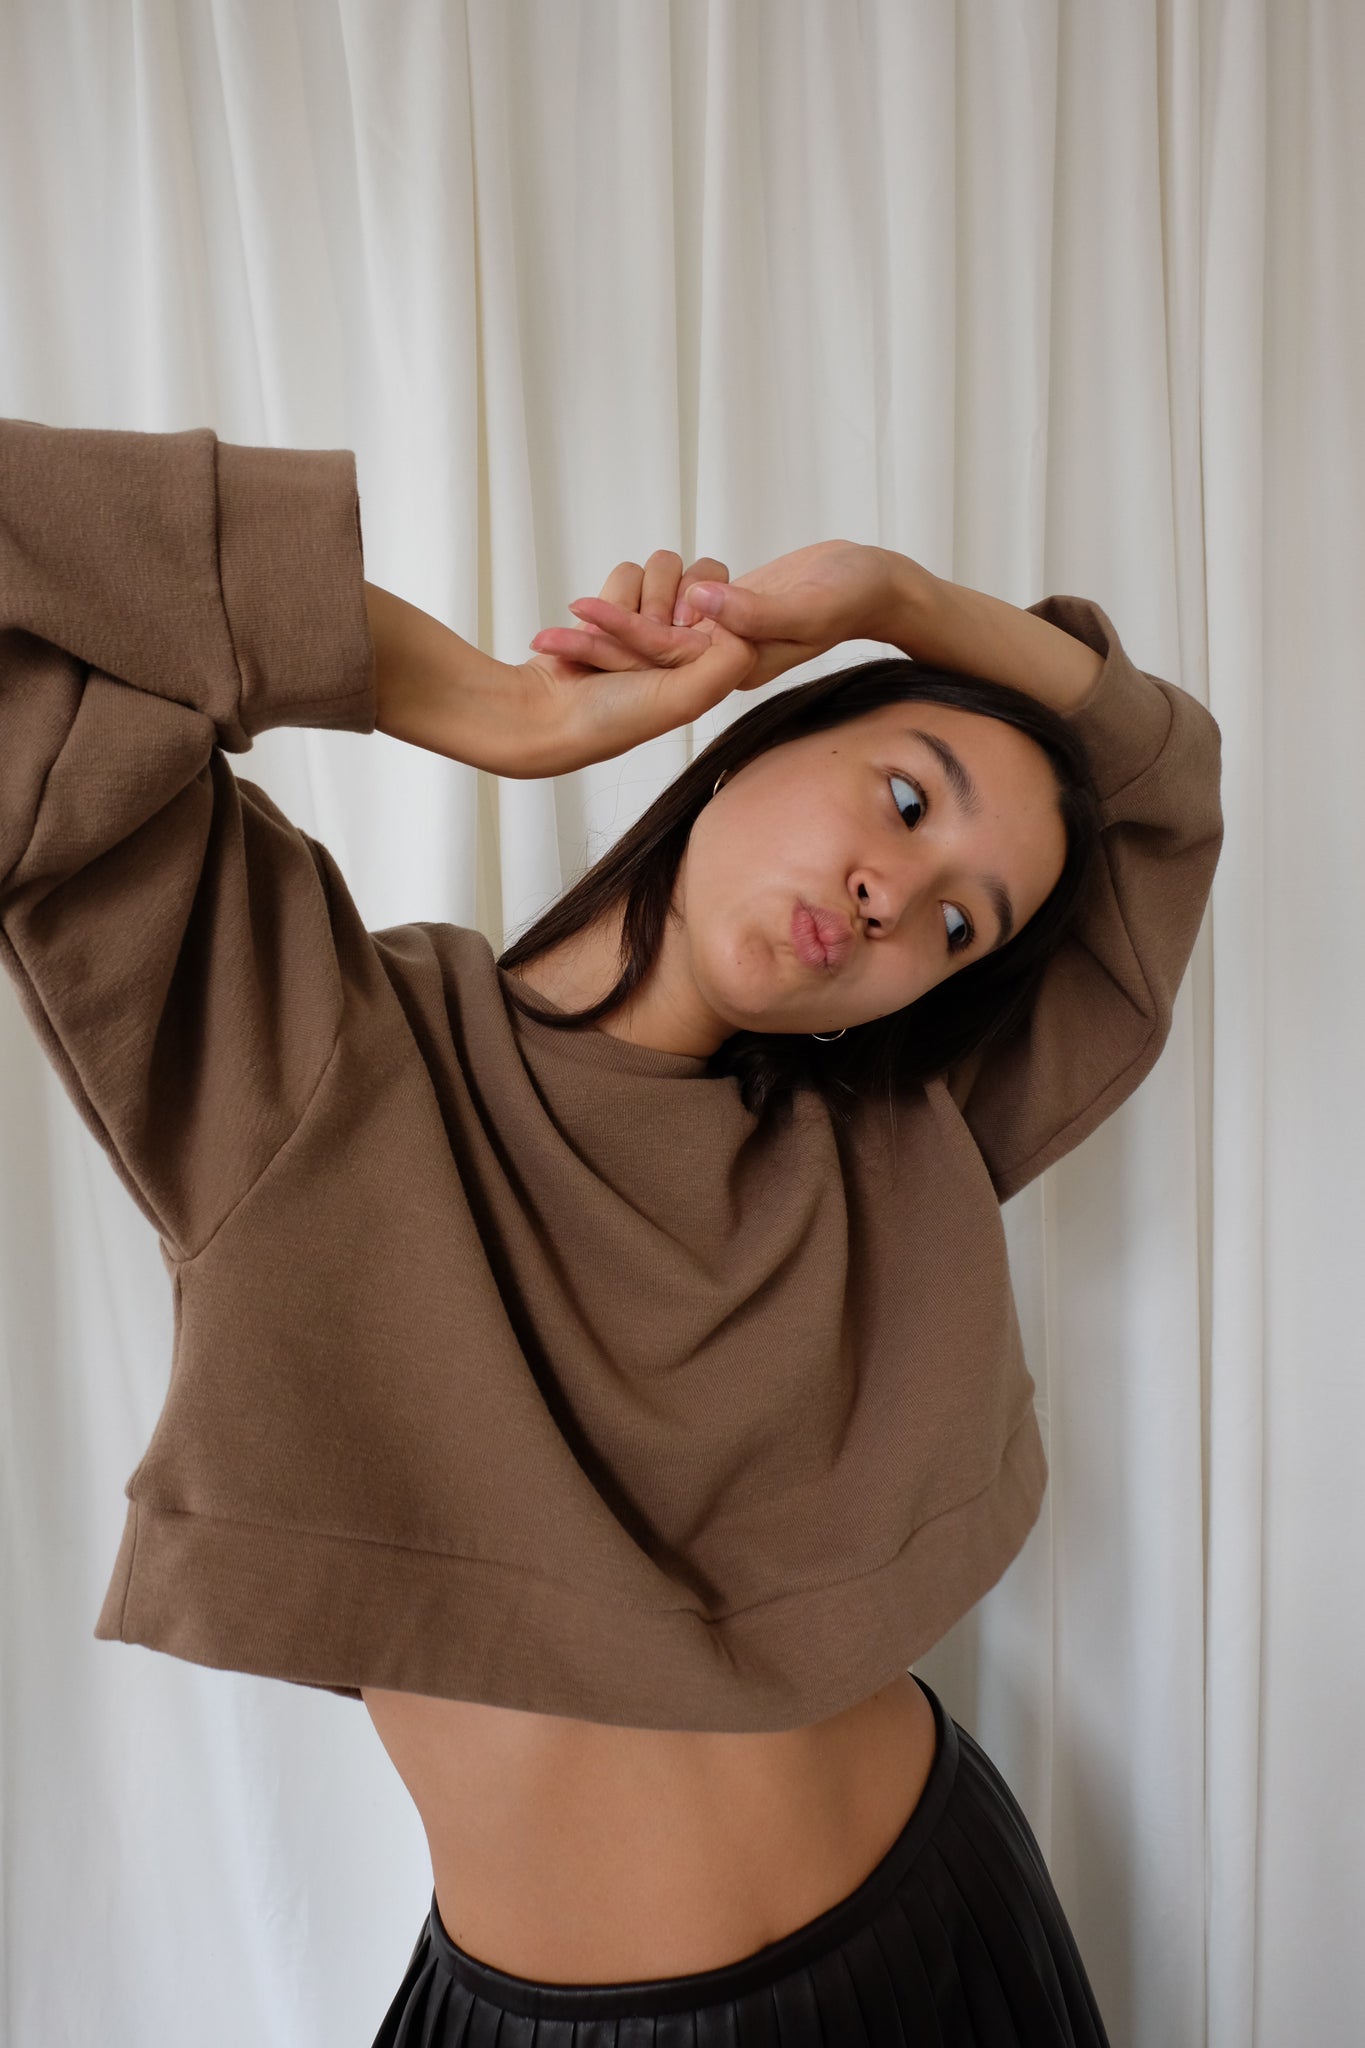 CROPPED SWEATER IN BROWN BY CAN PEP REY - BEYOND STUDIOS